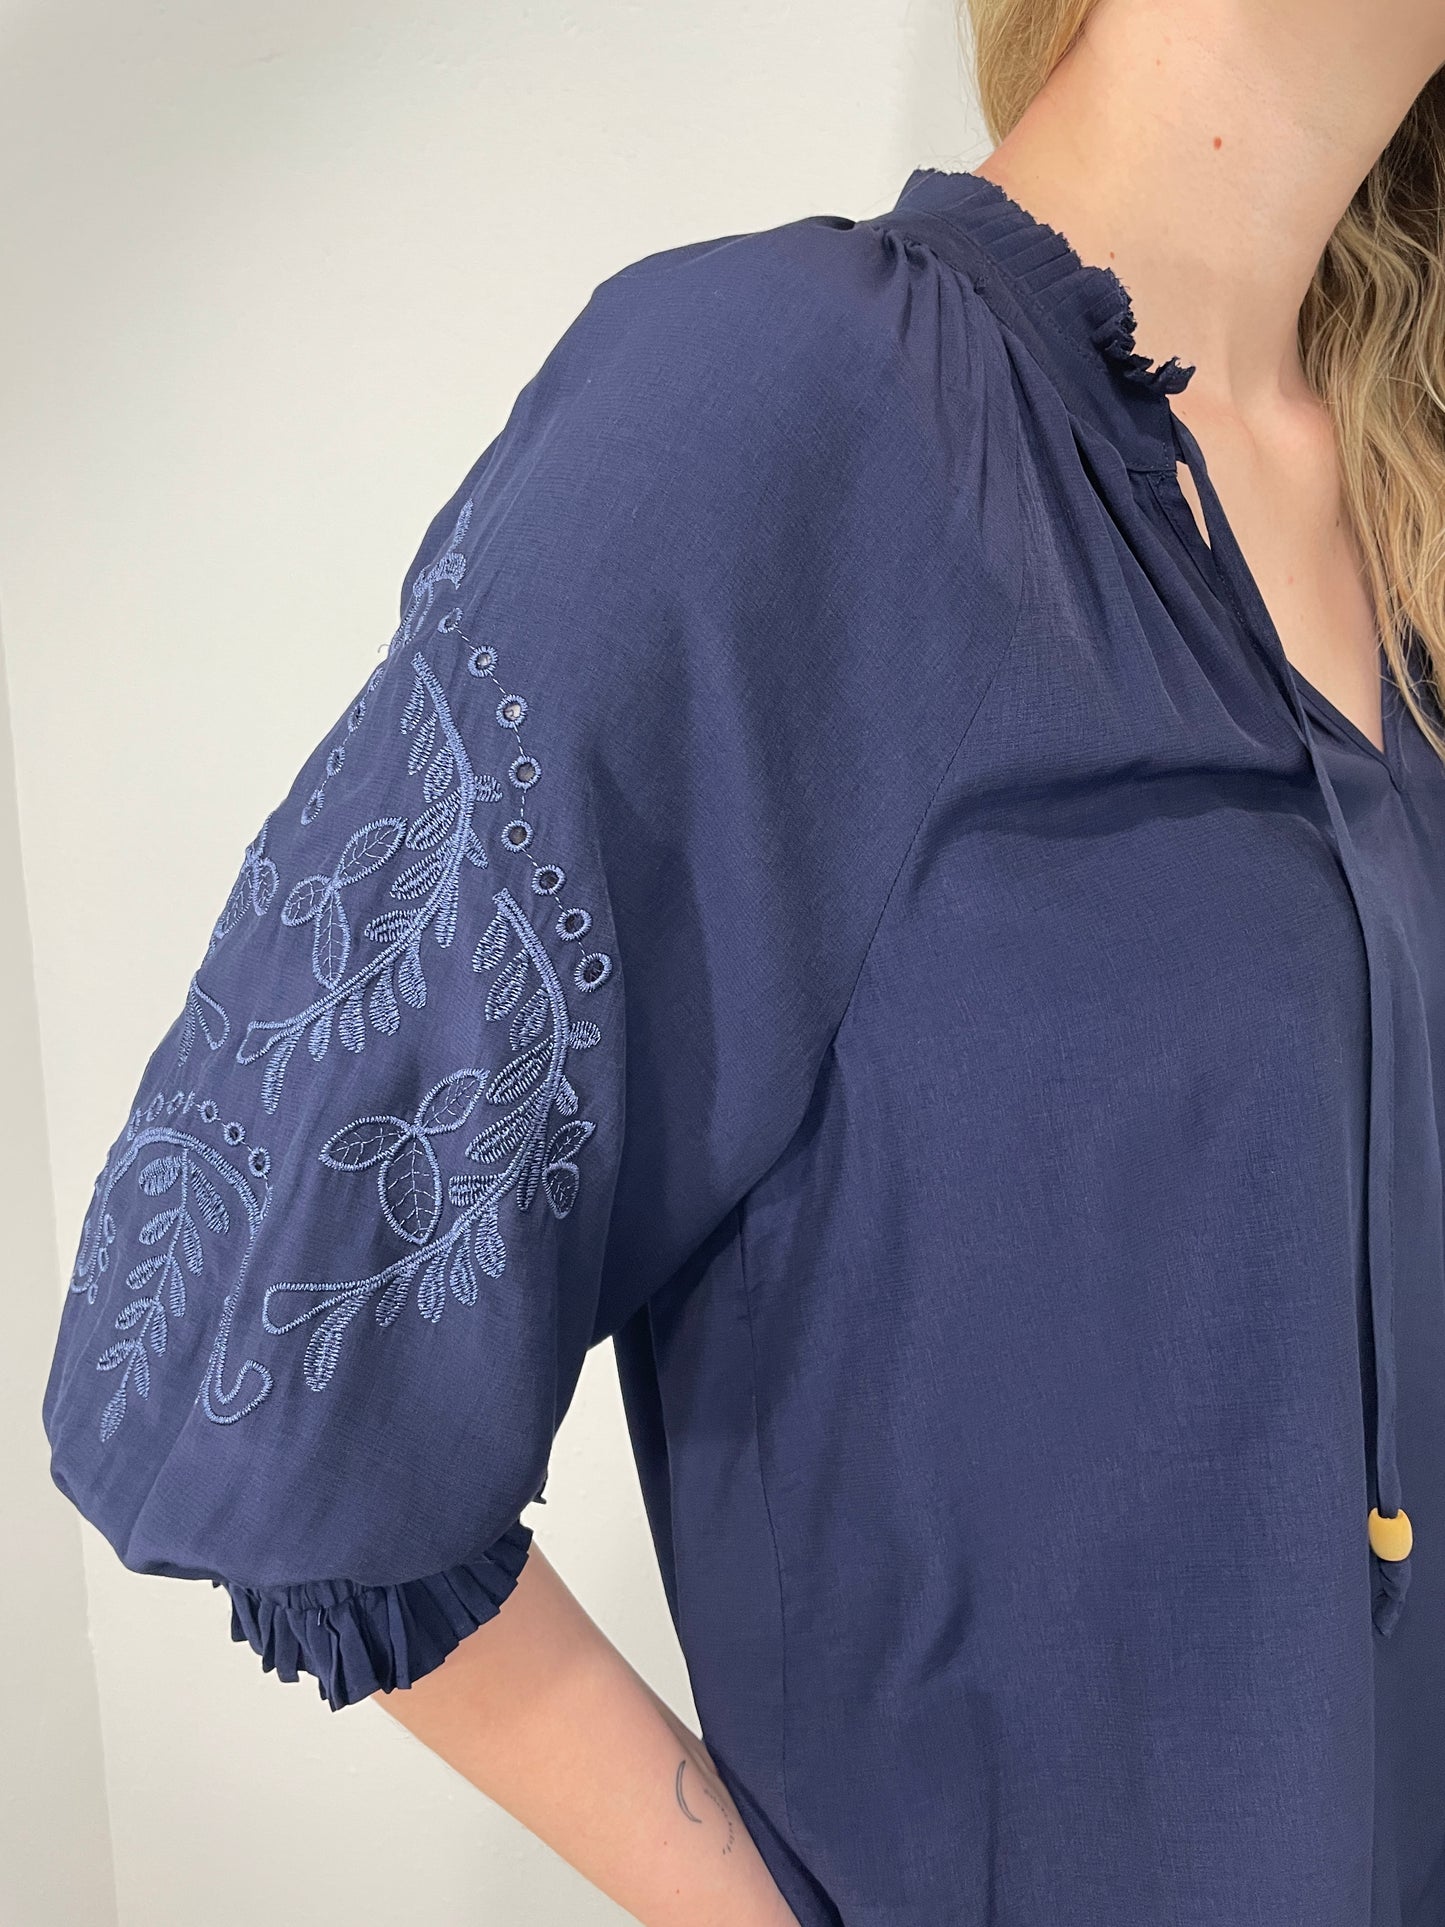 EMBROIDERED SLEEVE PEASANT TOP - NAVY